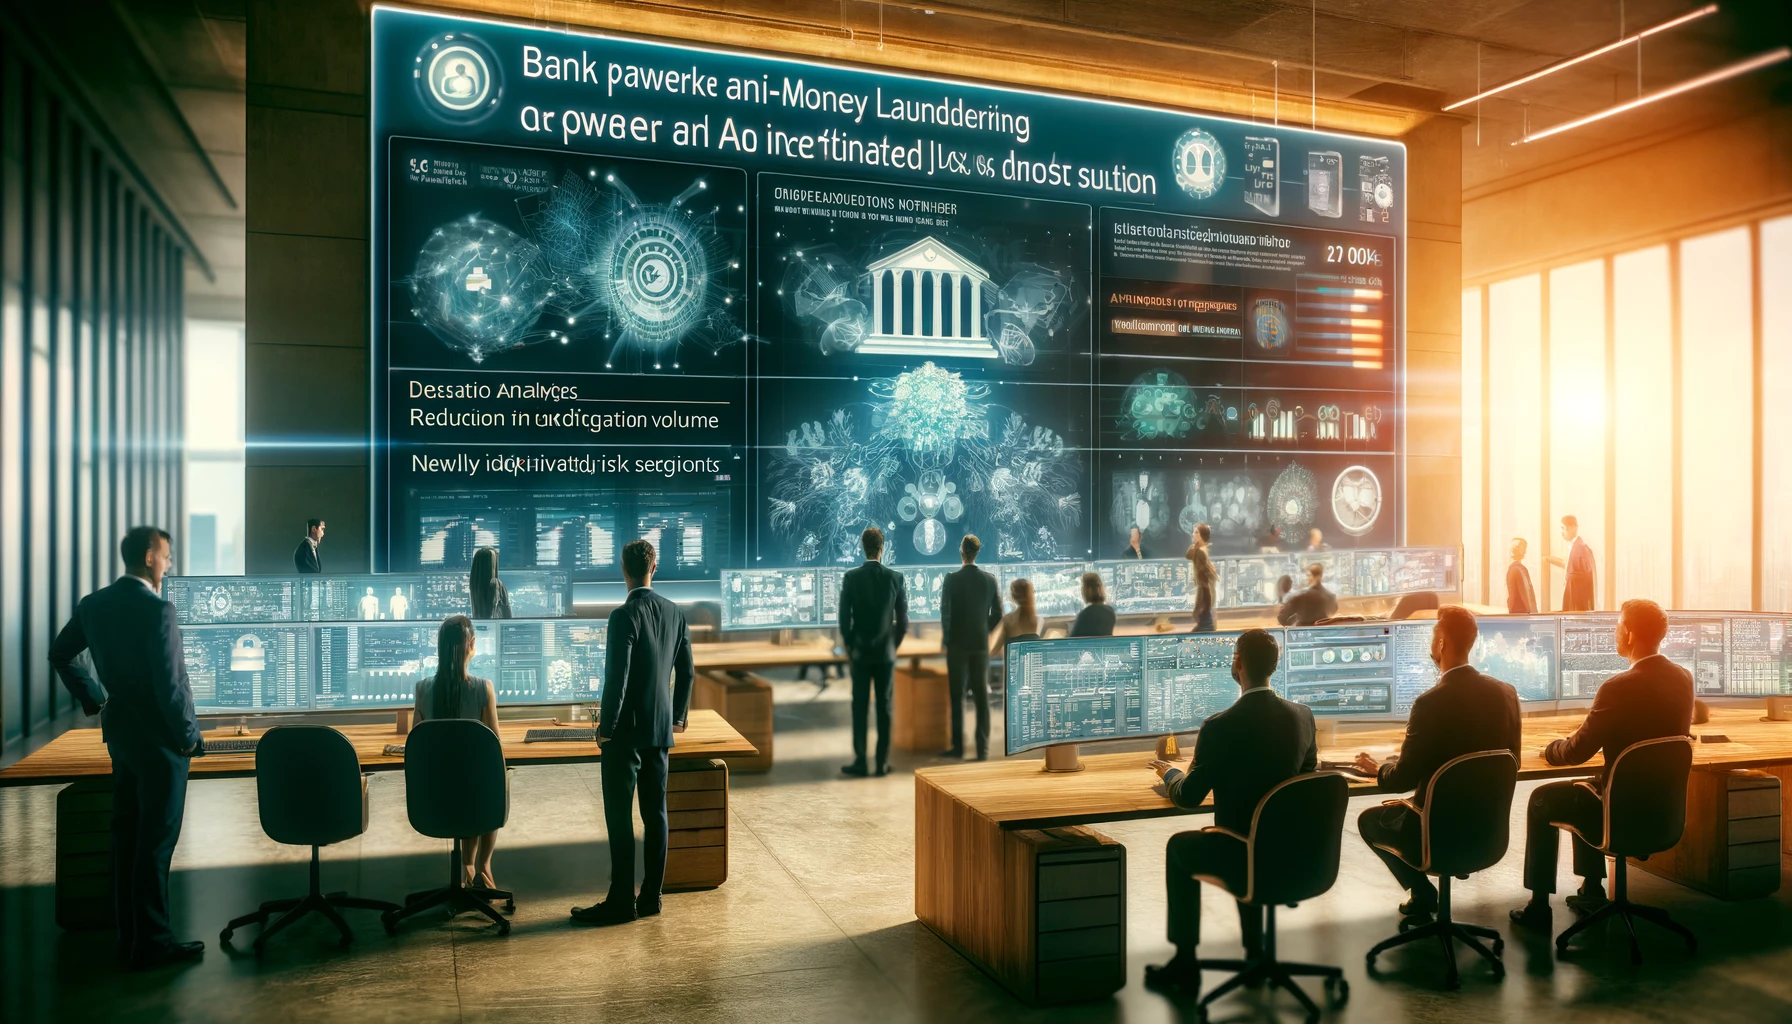 The illustration for the article about a bank employing an AI-powered anti-money laundering solution is ready, depicting a high-tech bank operations center where staff use AI to enhance their monitoring and decision-making capabilities.